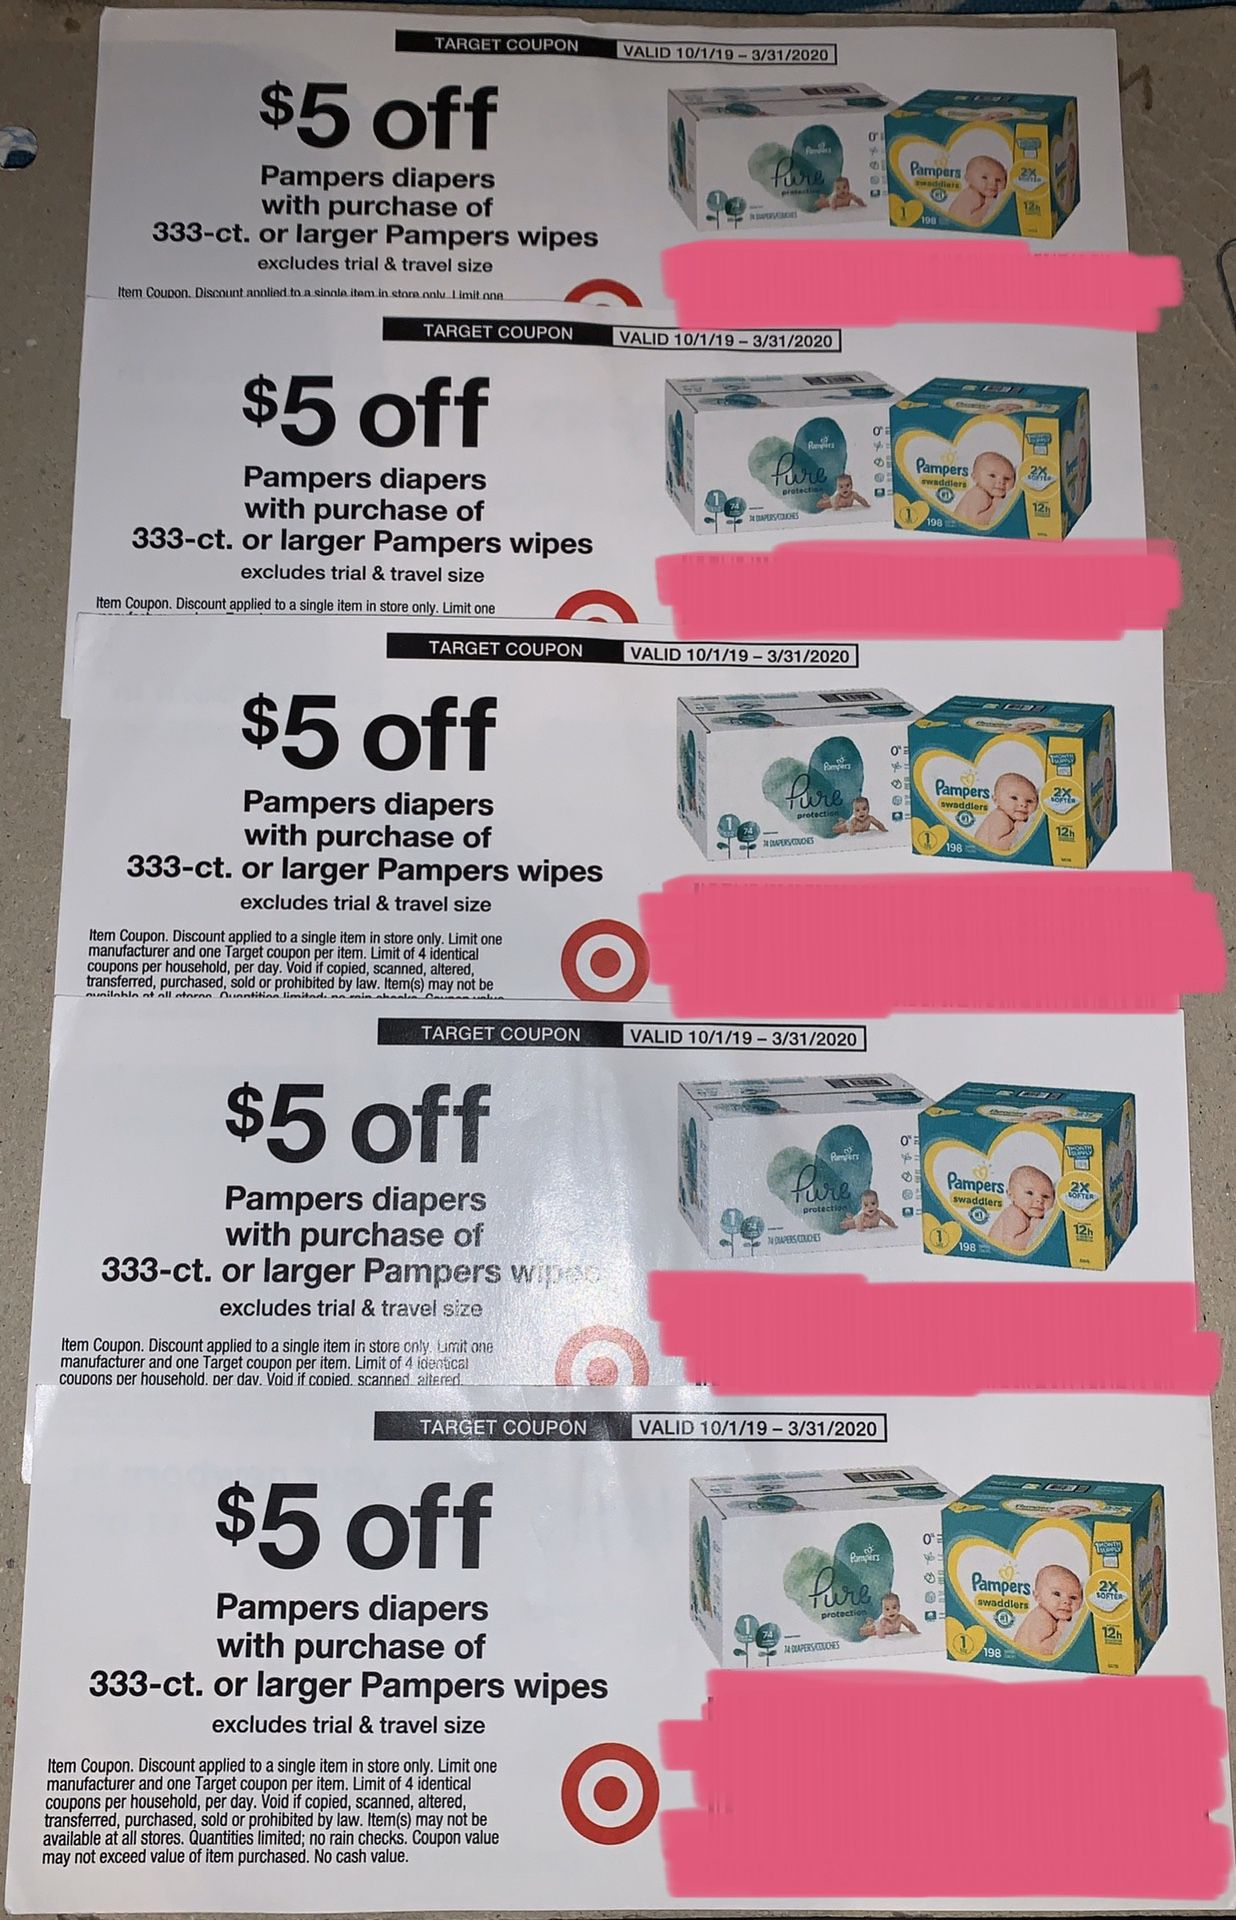 5 Target coupons: $5 off Pampers diapers, exp 3/31/20